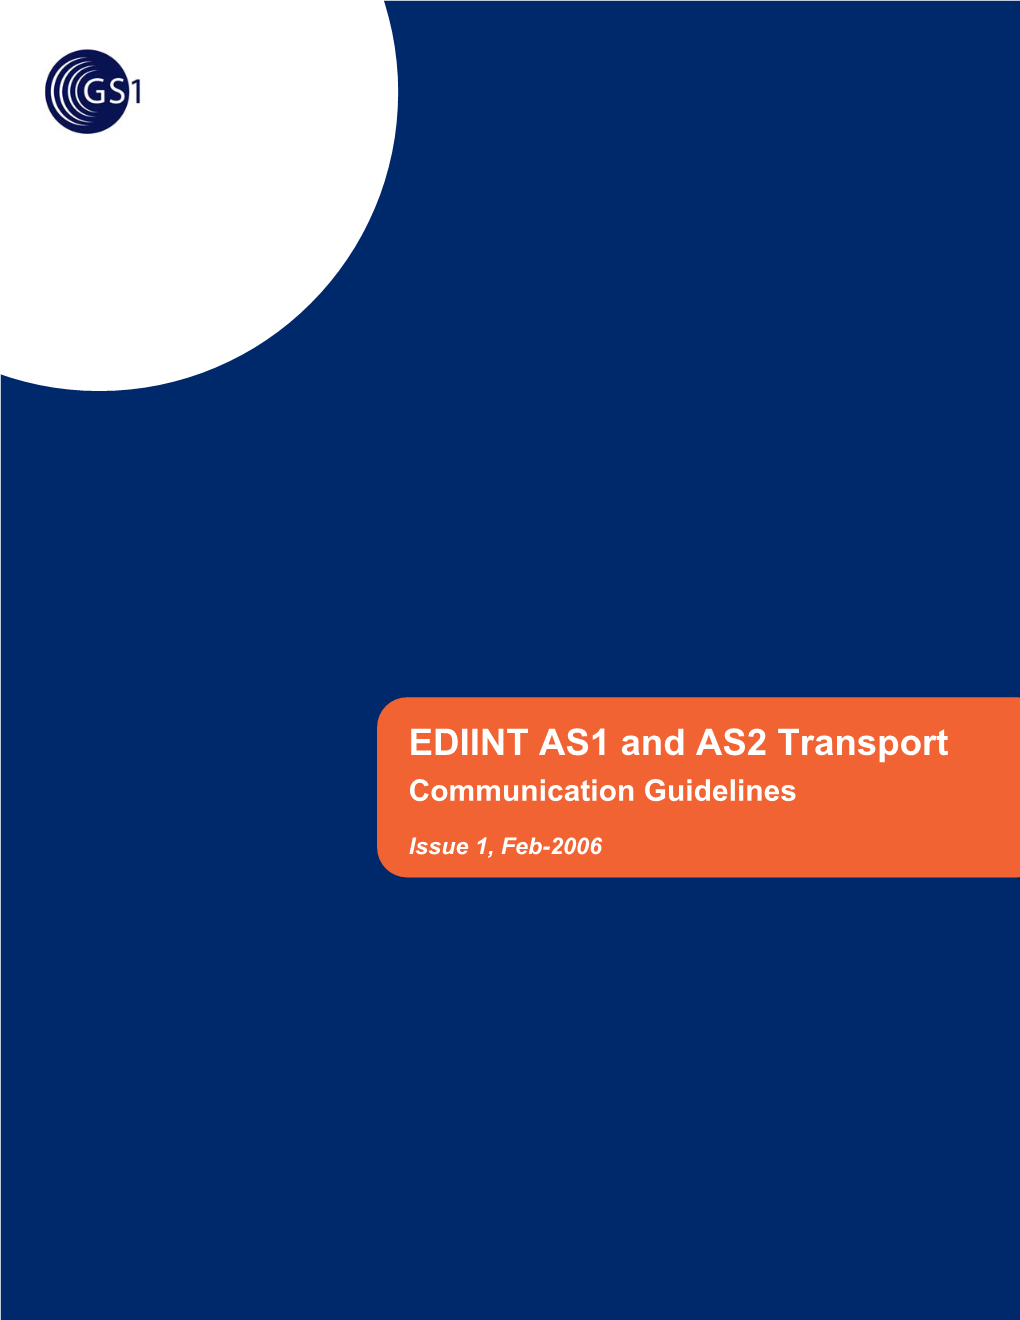 EDIINT AS1 and AS2 Transport Communication Guidelines